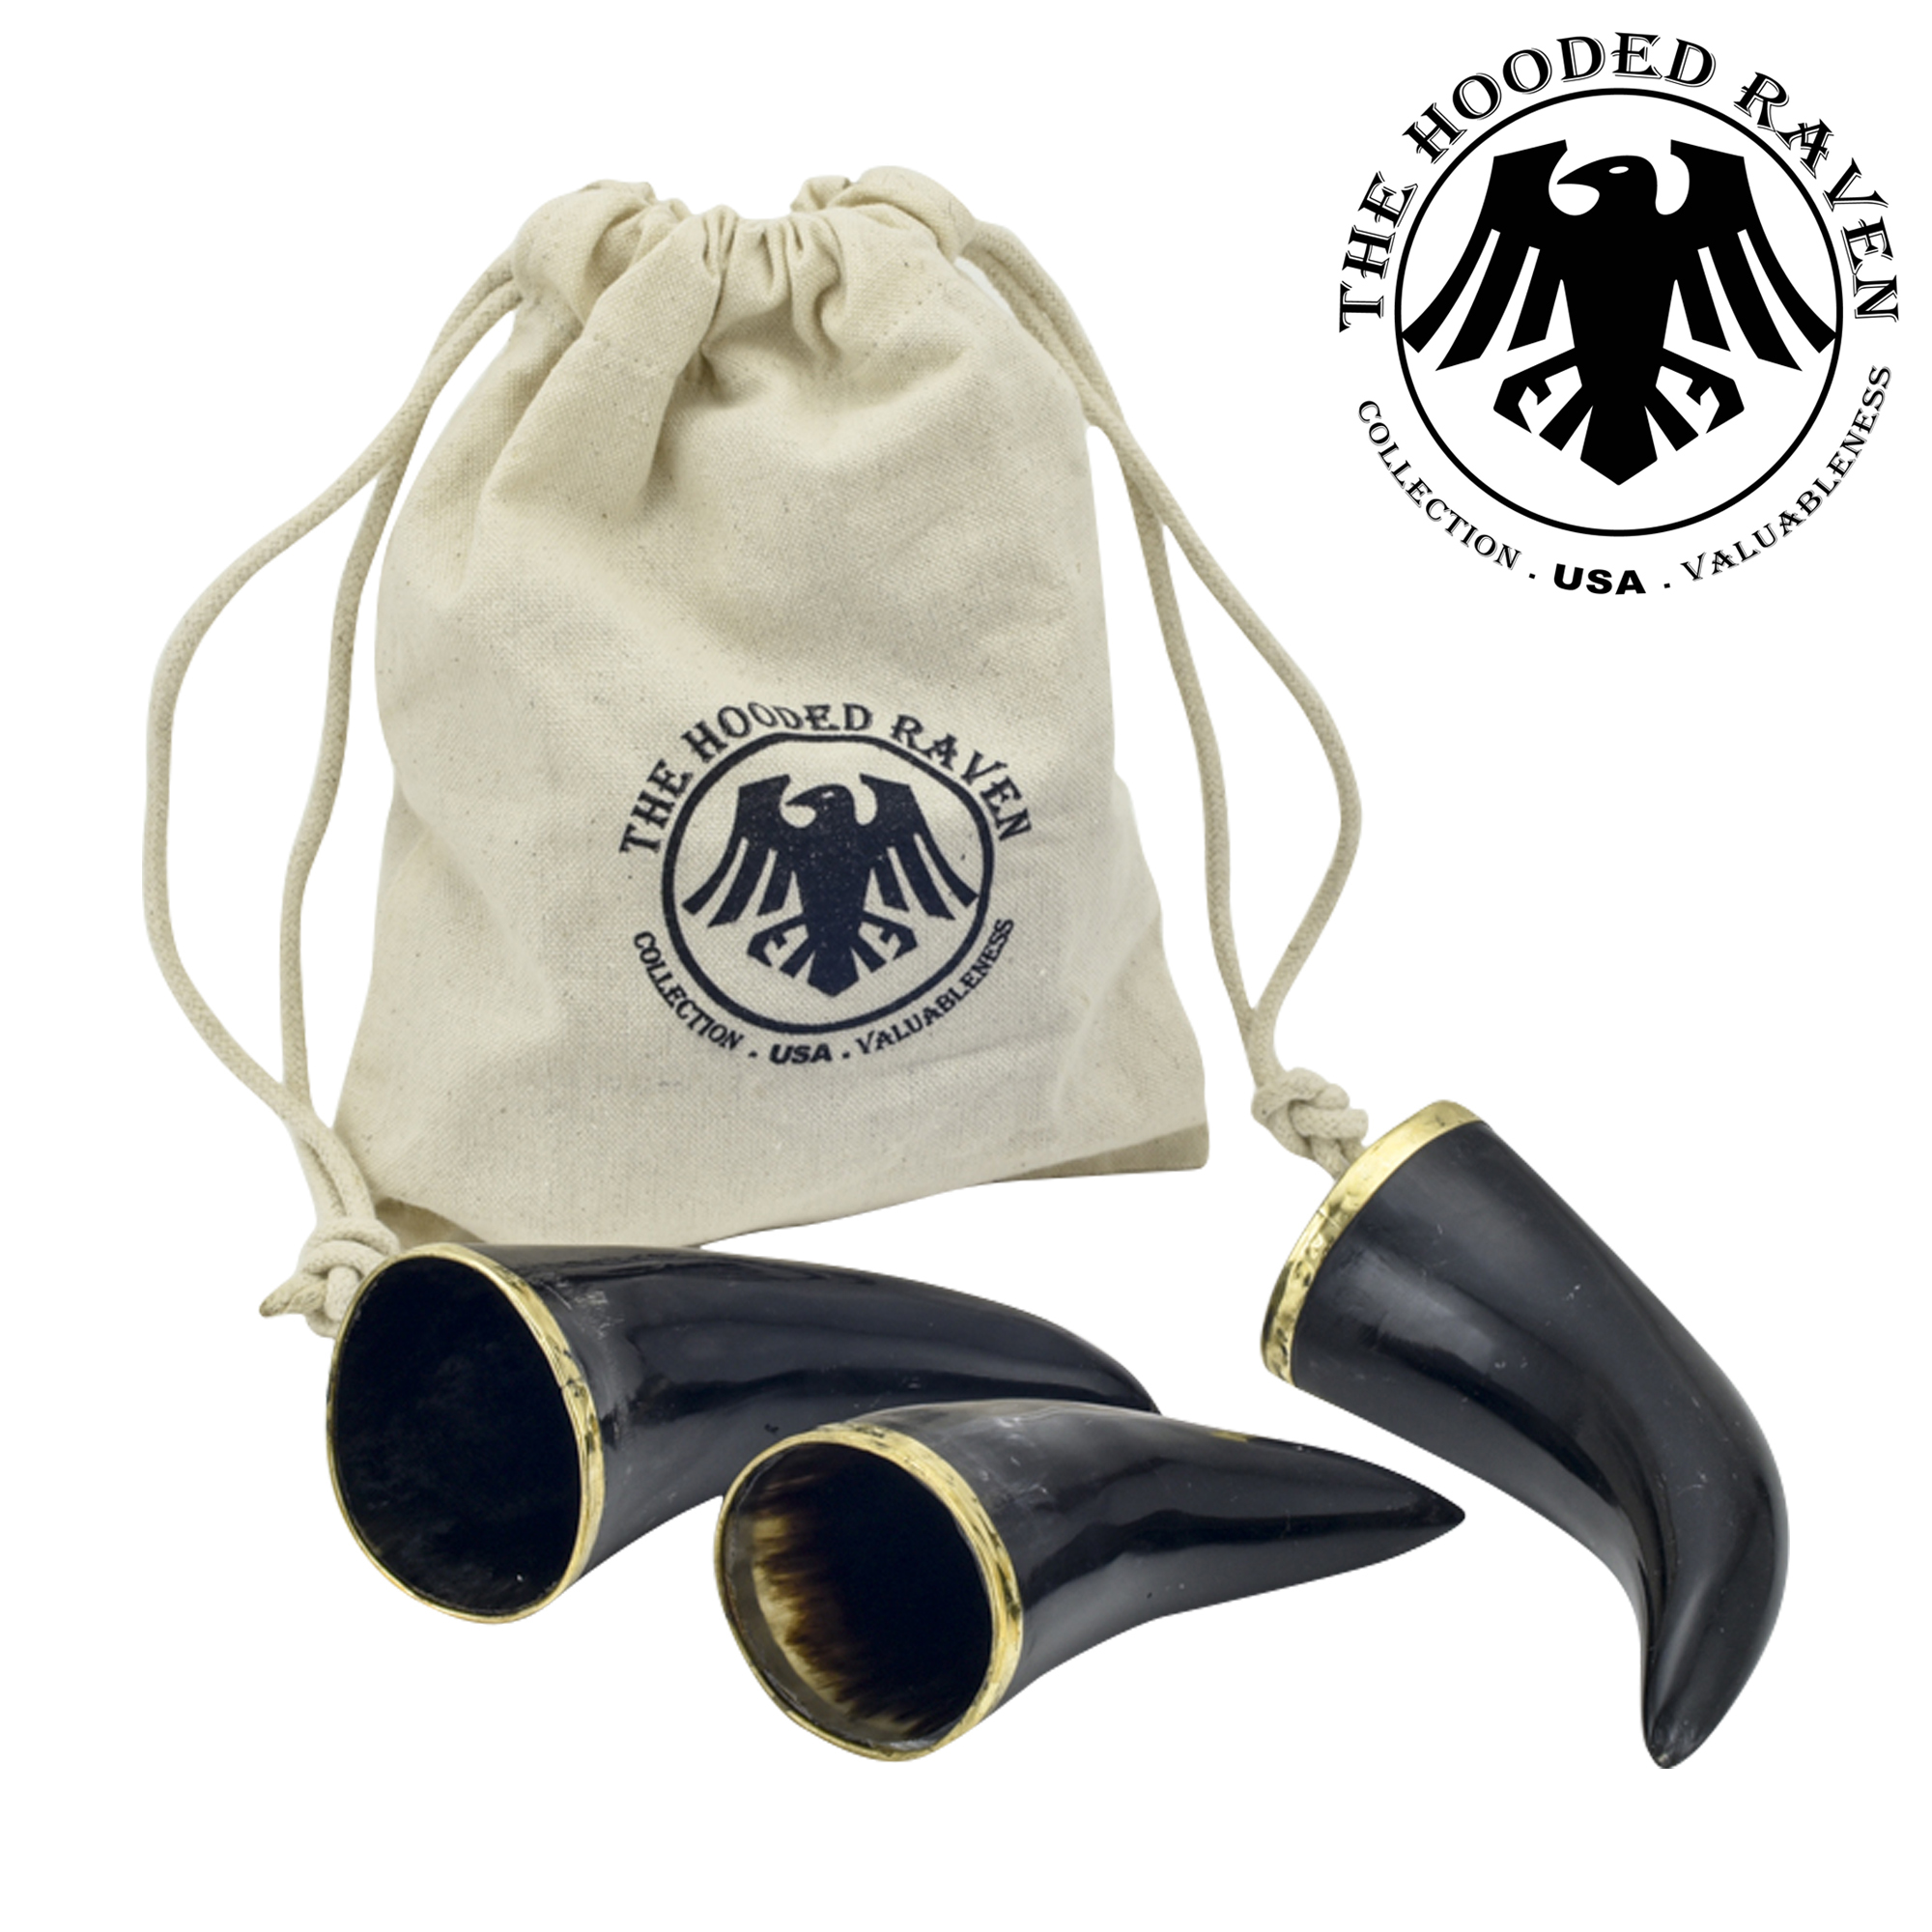 The Hooded Raven ? 3-Piece Drinking Horn Shot Set Canvas BAG Carrier Included